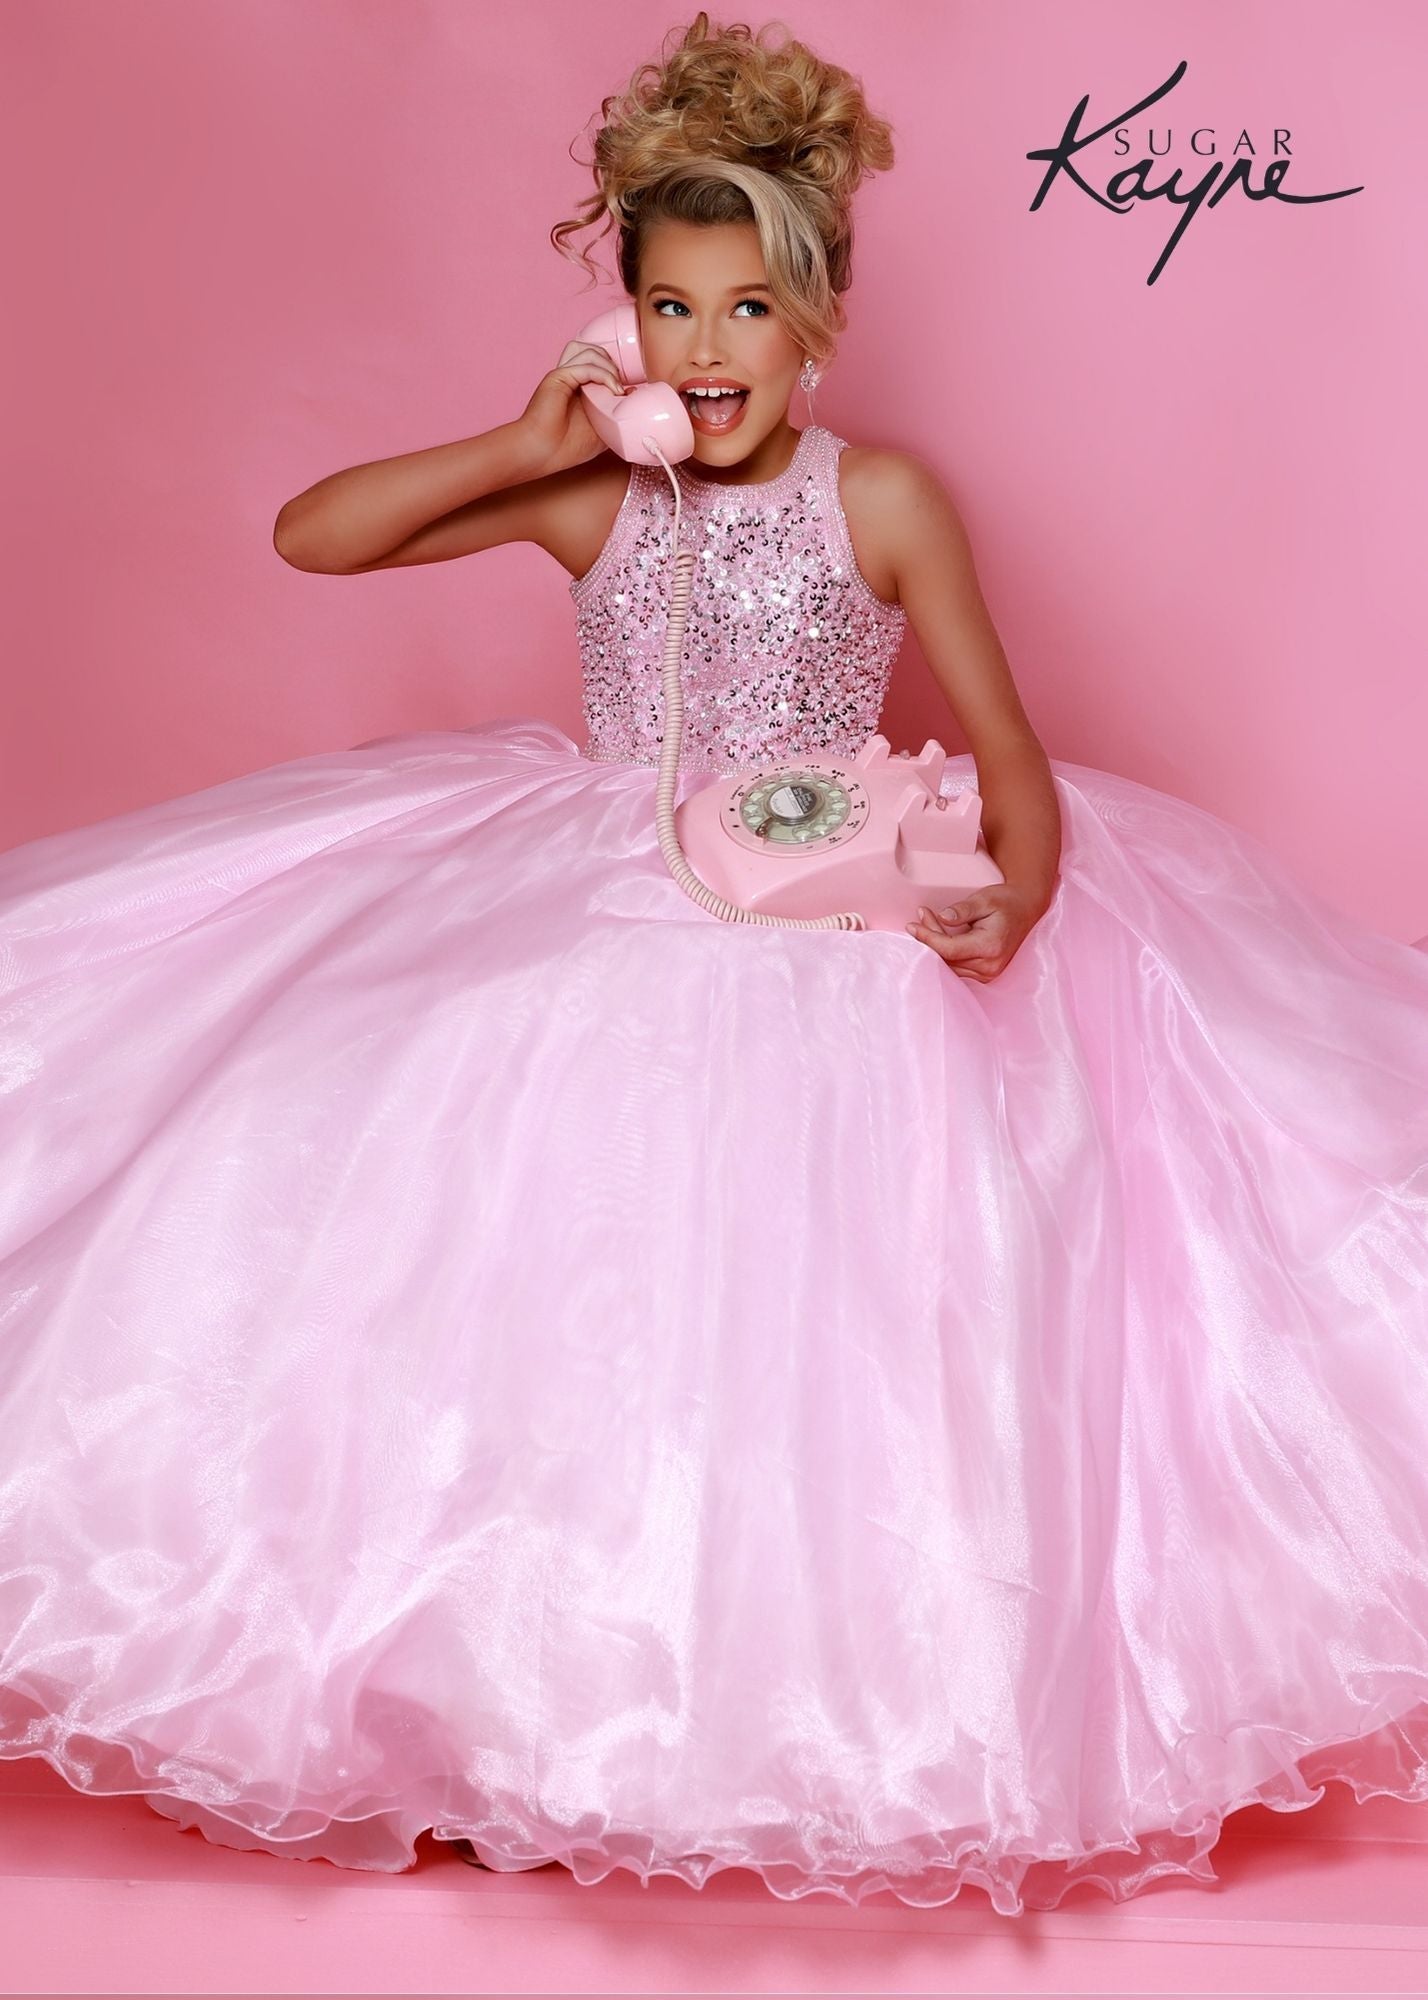    Sugar-Kayne-C186-Petal-Pink-Girls-Pageant-Dress-SequinPearl-encrusted-top-heart-cutout-in-the-back-long-organza-ballgown-skirt-with-train